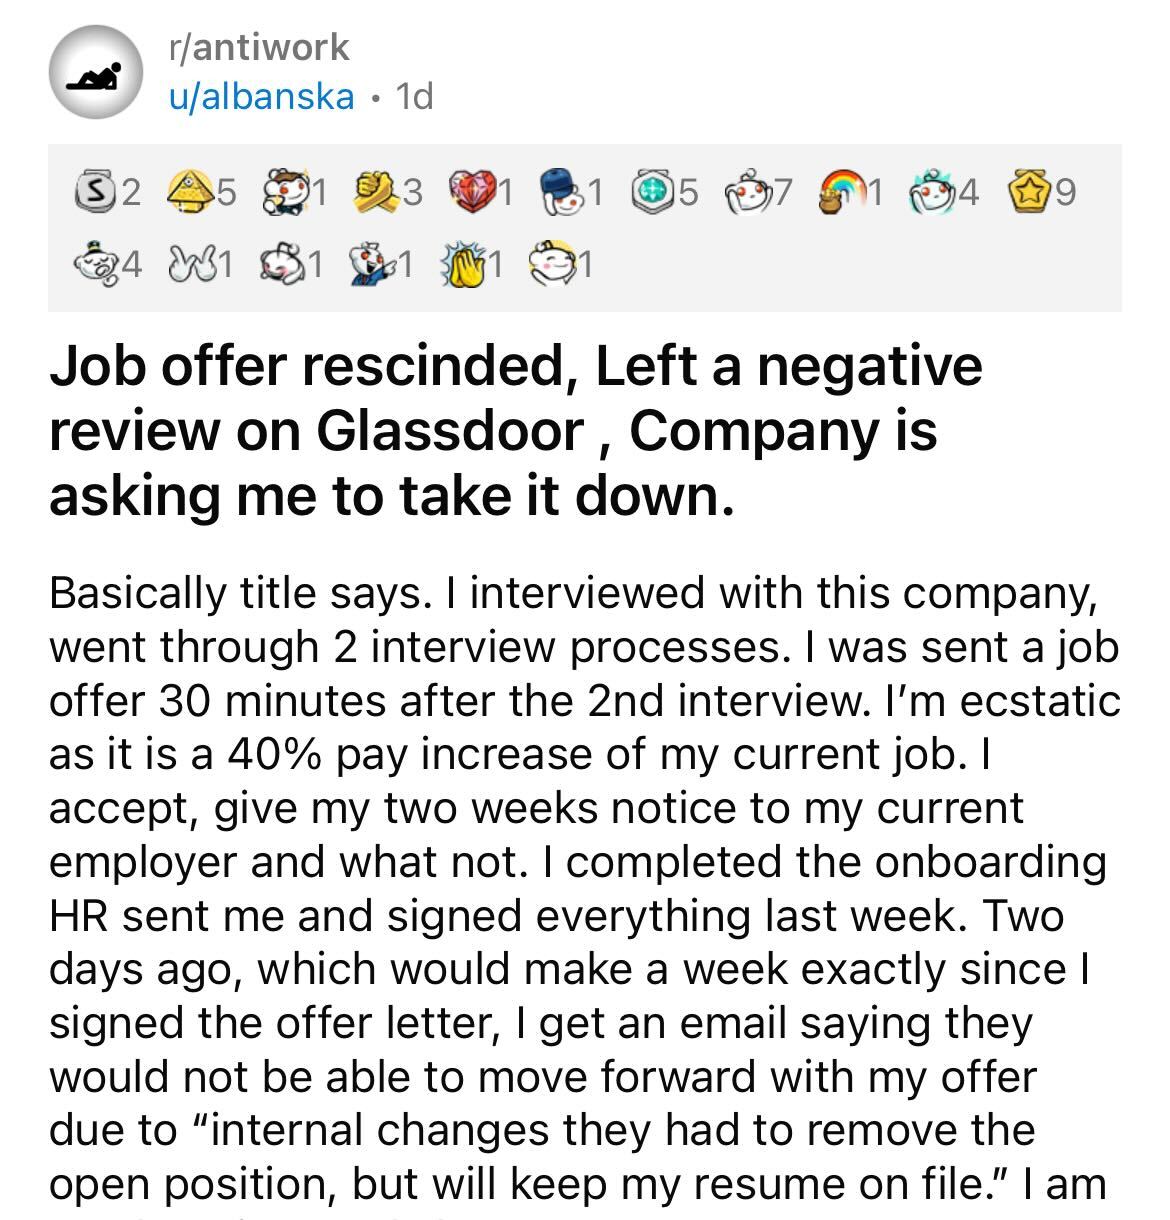 document - rantiwork ualbanska 1d 32 45 4 1 e 13 1 0 5 14 Job offer rescinded, Left a negative review on Glassdoor, Company is asking me to take it down. Basically title says. I interviewed with this company, went through 2 interview processes. I was sent